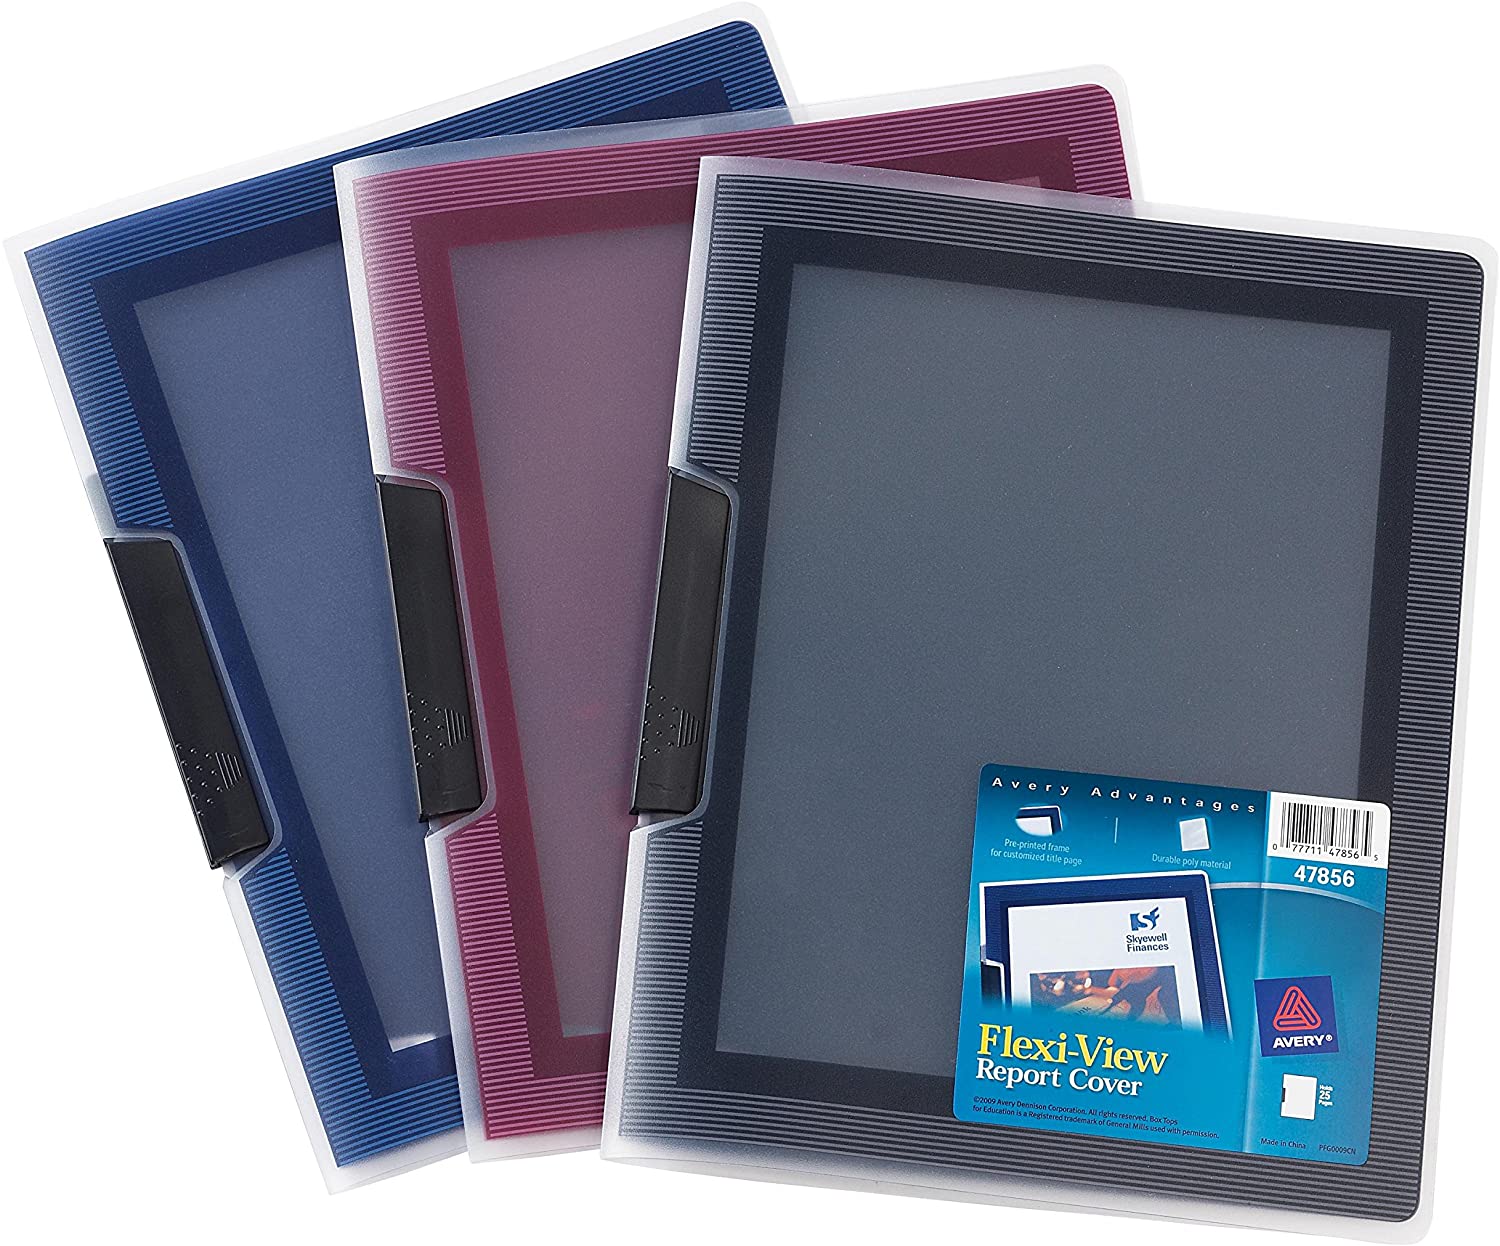 Avery Flexi-View Report Cover, Assorted Colors, Color May Vary, 1 Cover (47856)